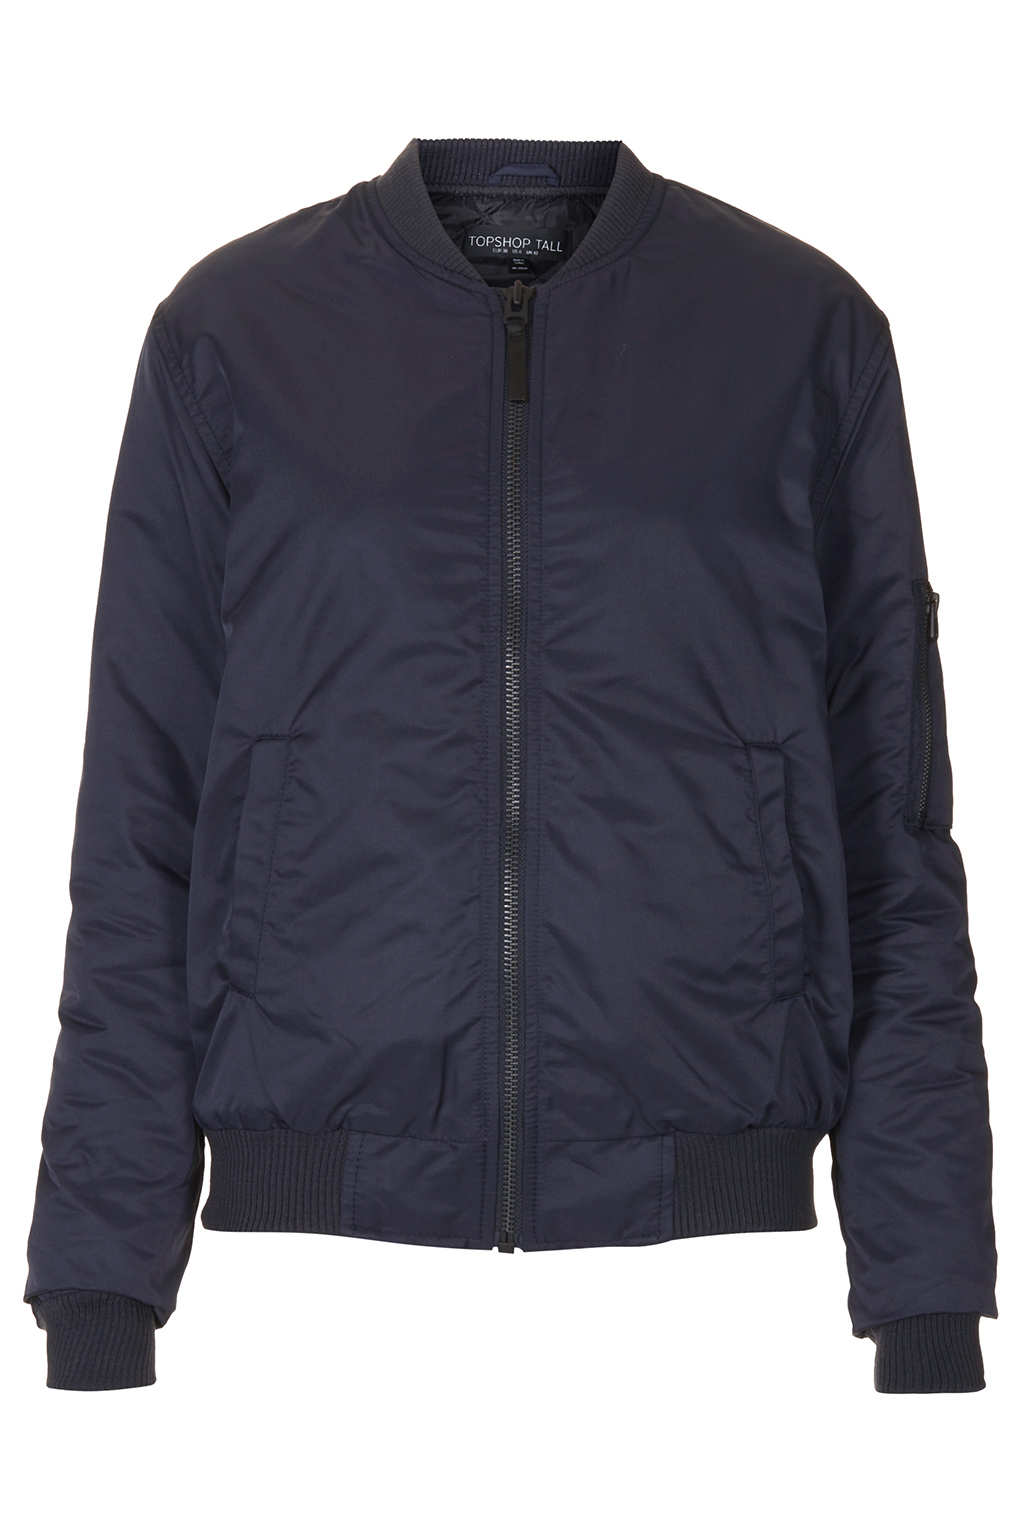 Topshop Tall Airforce Bomber Jacket in Blue (NAVY BLUE) | Lyst